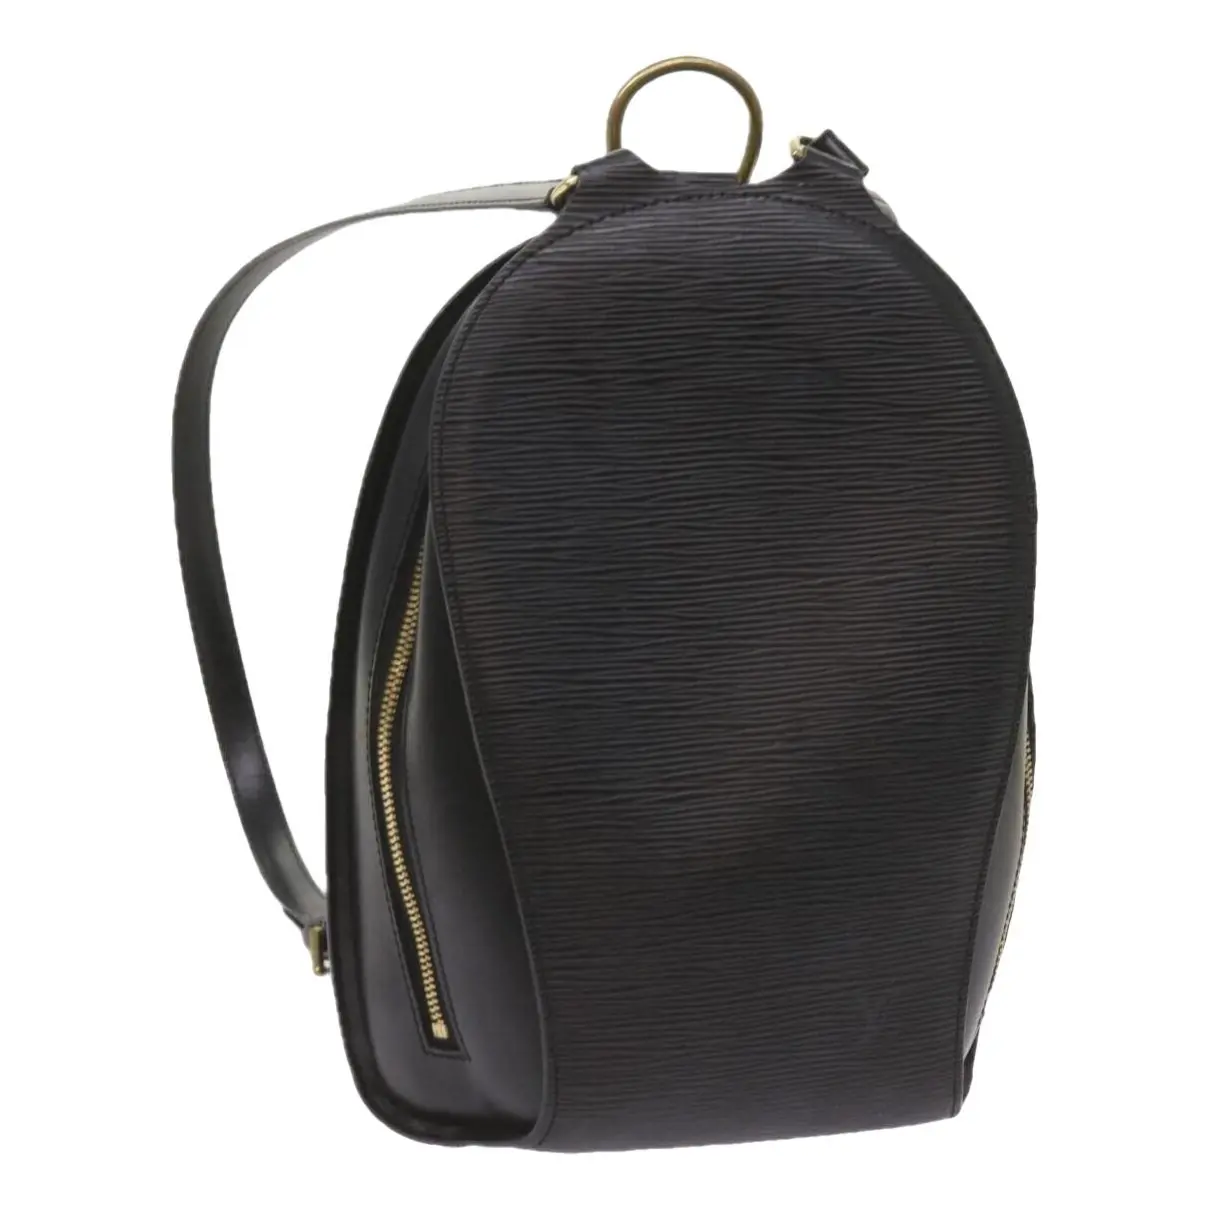 Mabillon leather backpack